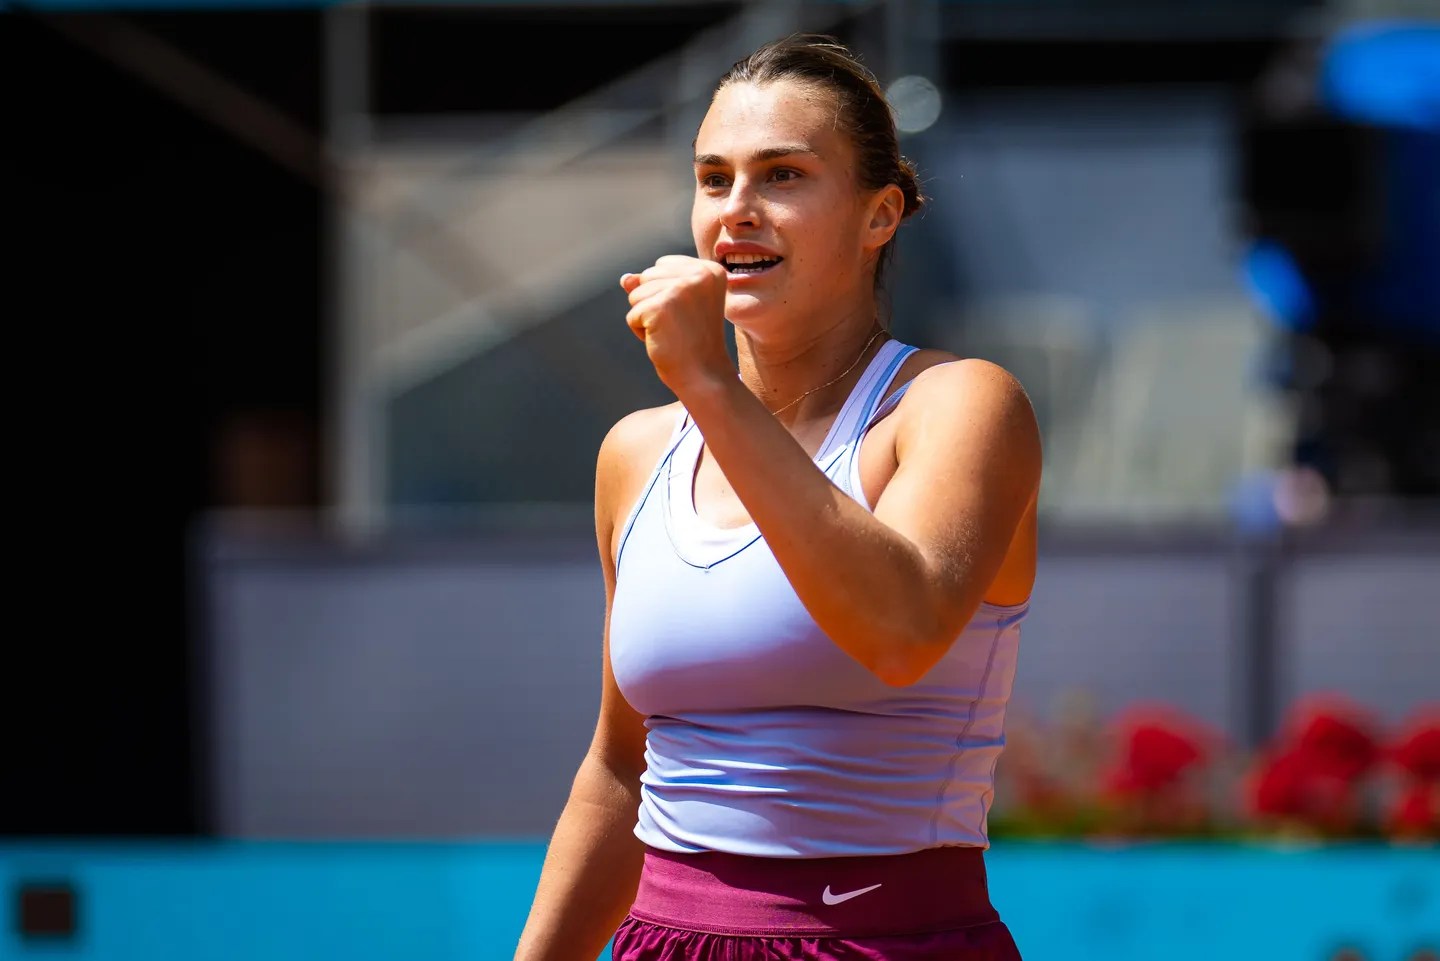 Madrid Open LIVE: Iga Swiatek and Aryna Sabalenka set up yet another final showdown in WTA Tour, top two seeds set to battle for Madrid Open title - Follow LIVE updates